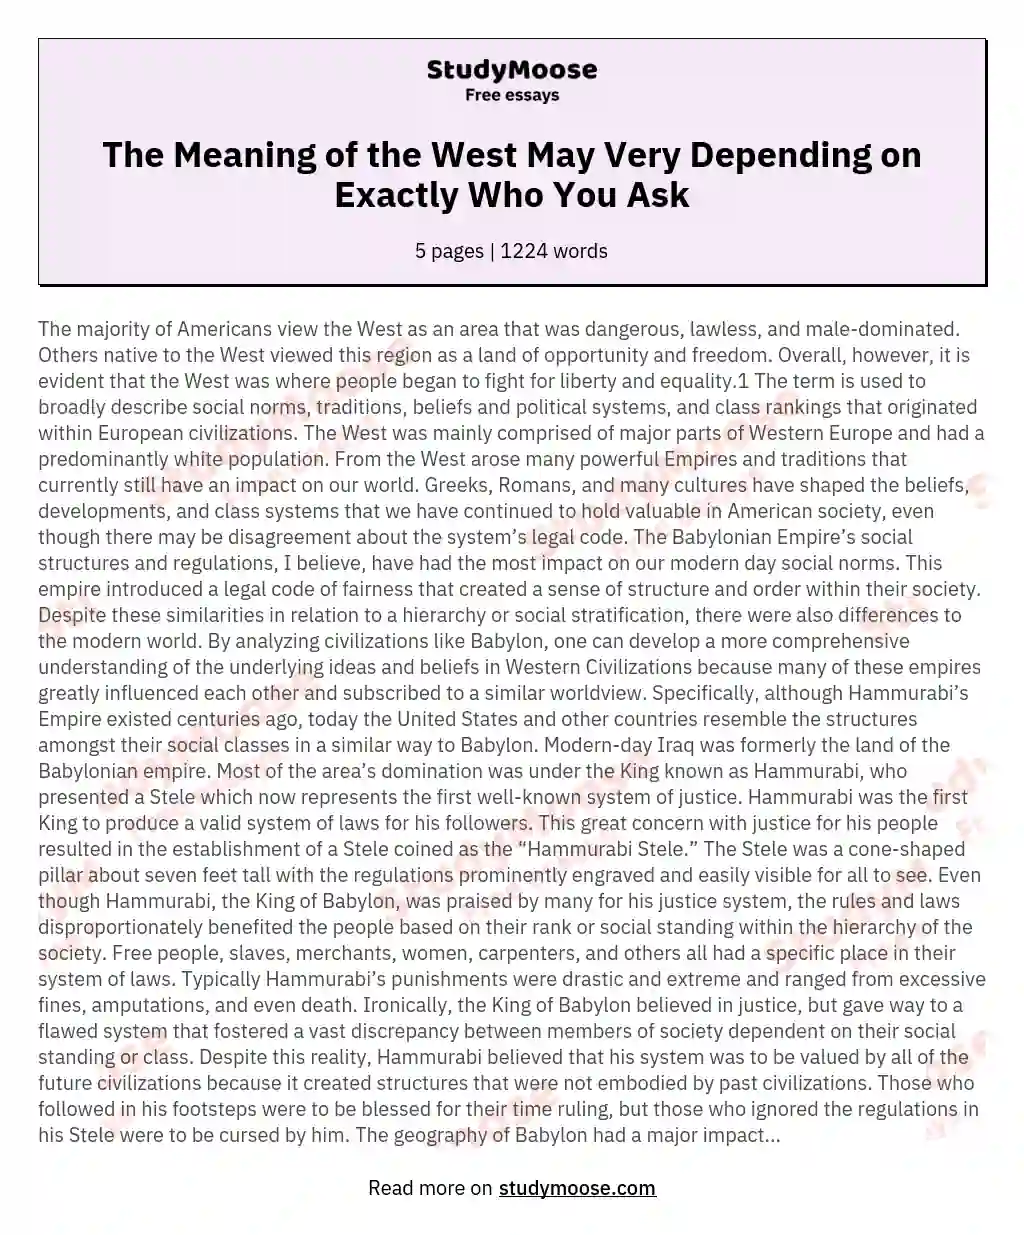 The Meaning of the West May Very Depending on Exactly Who You Ask essay